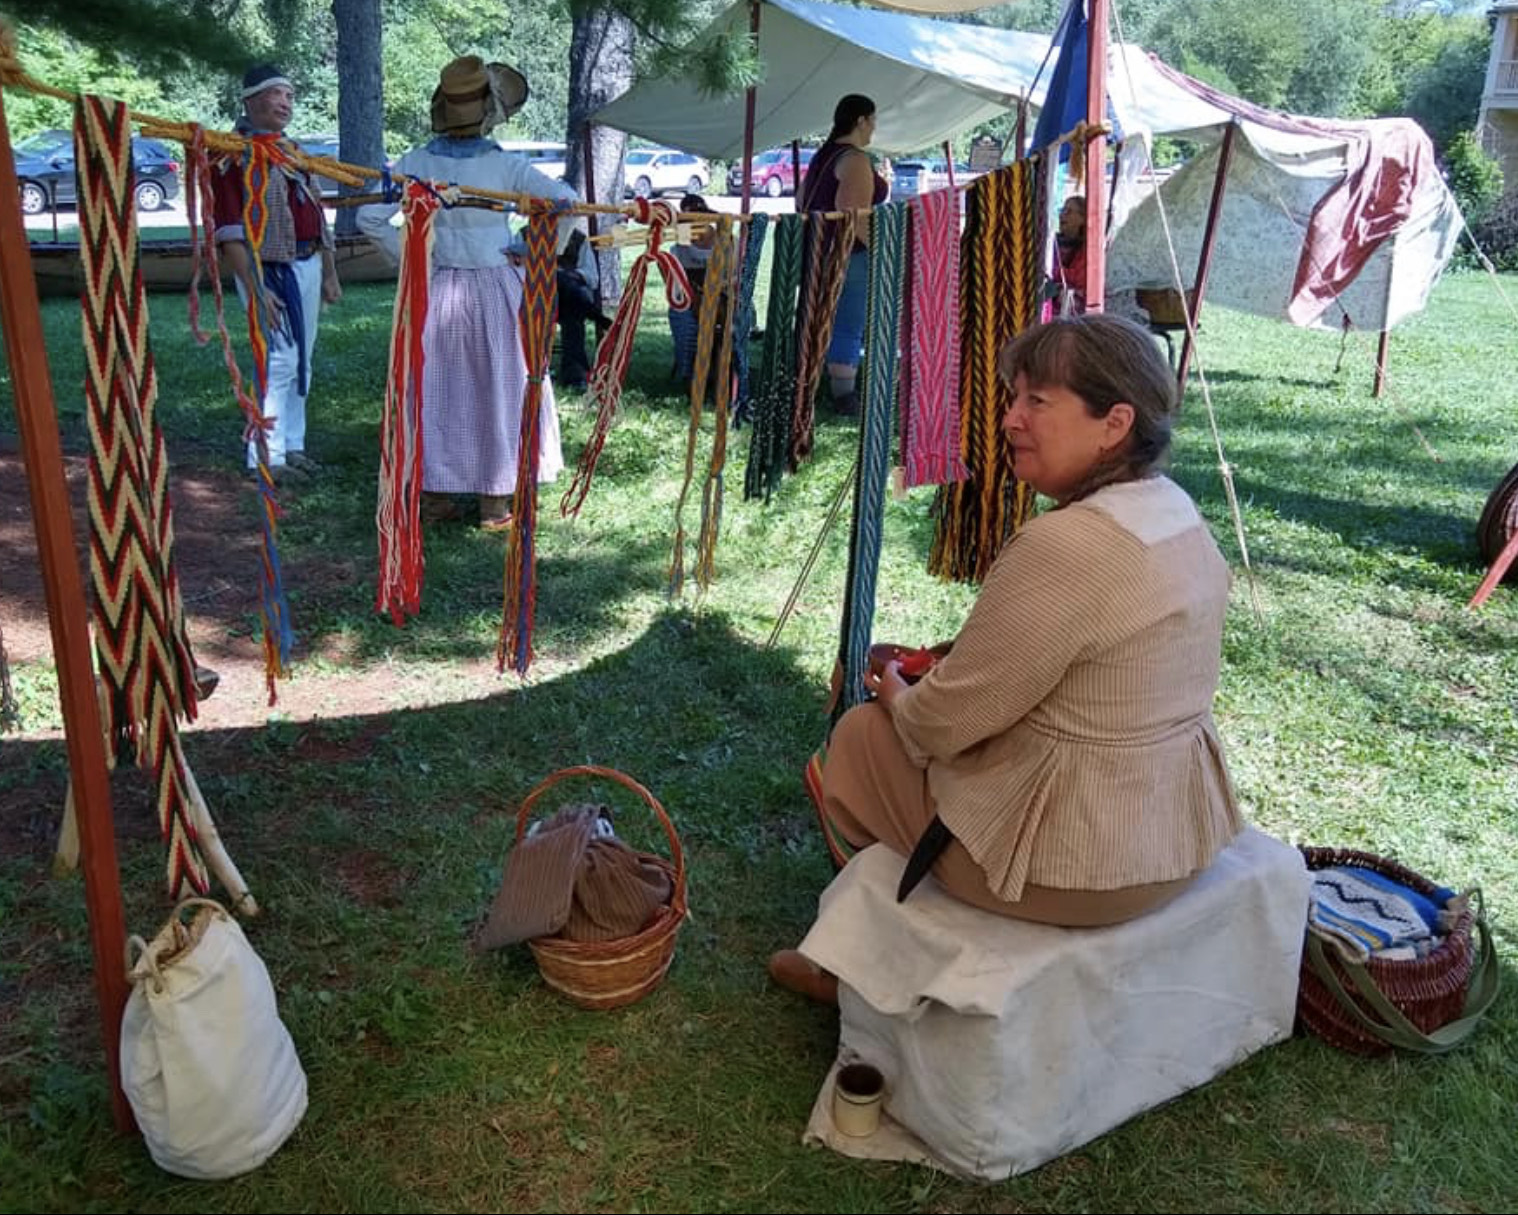 A voyageur encampment was held shortly after the exhibit opened at Tourist Park.